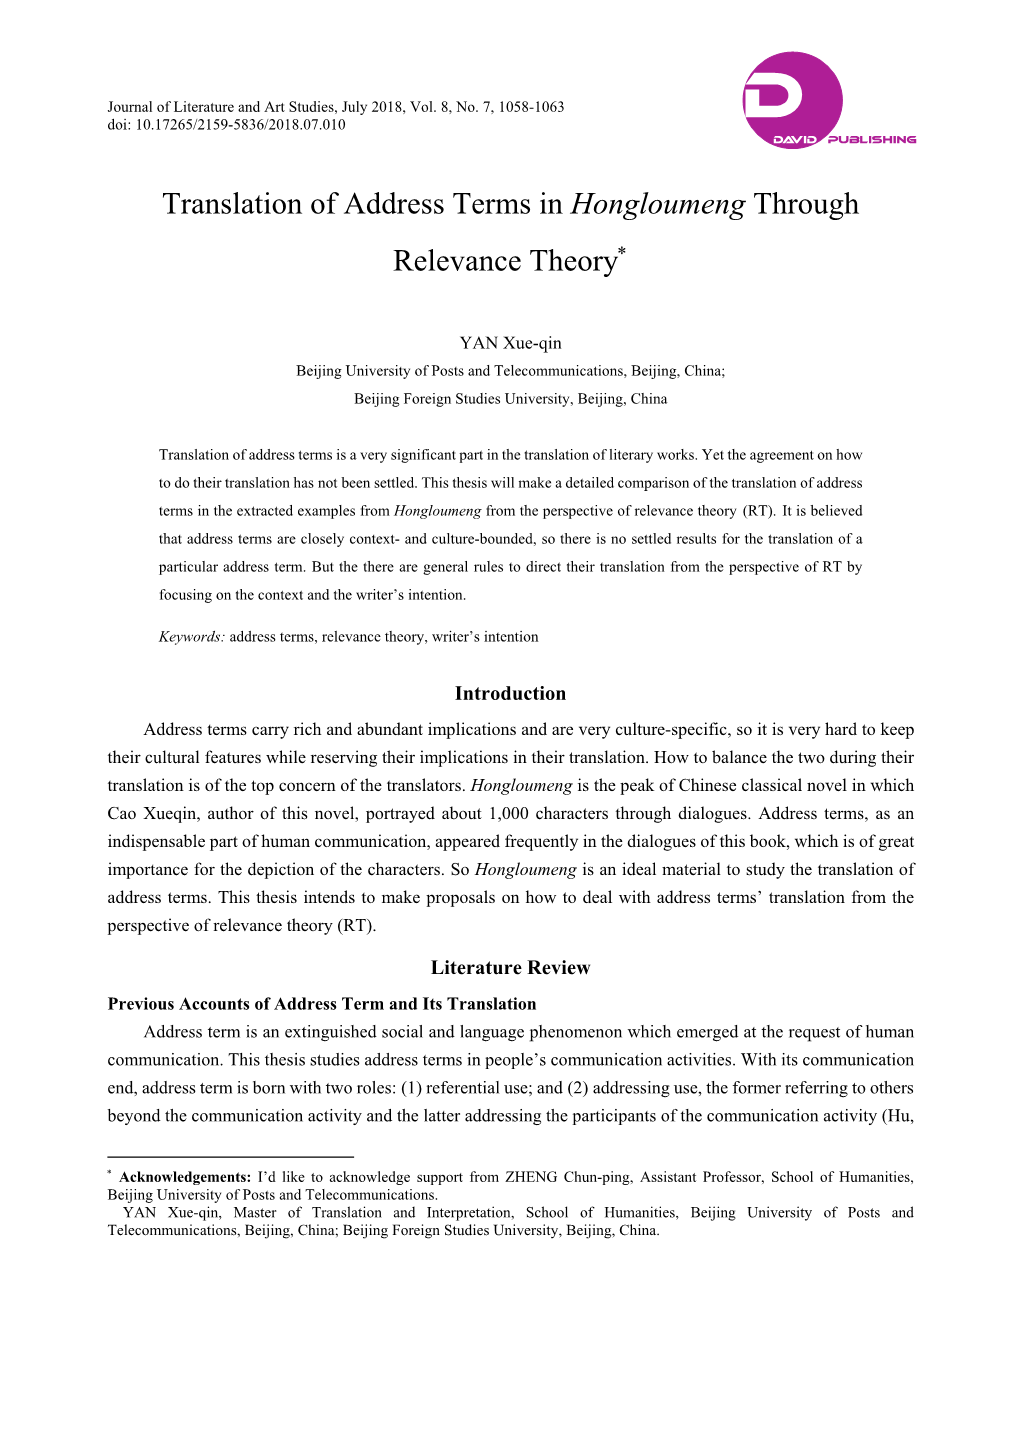 Translation of Address Terms in Hongloumeng Through Relevance Theory